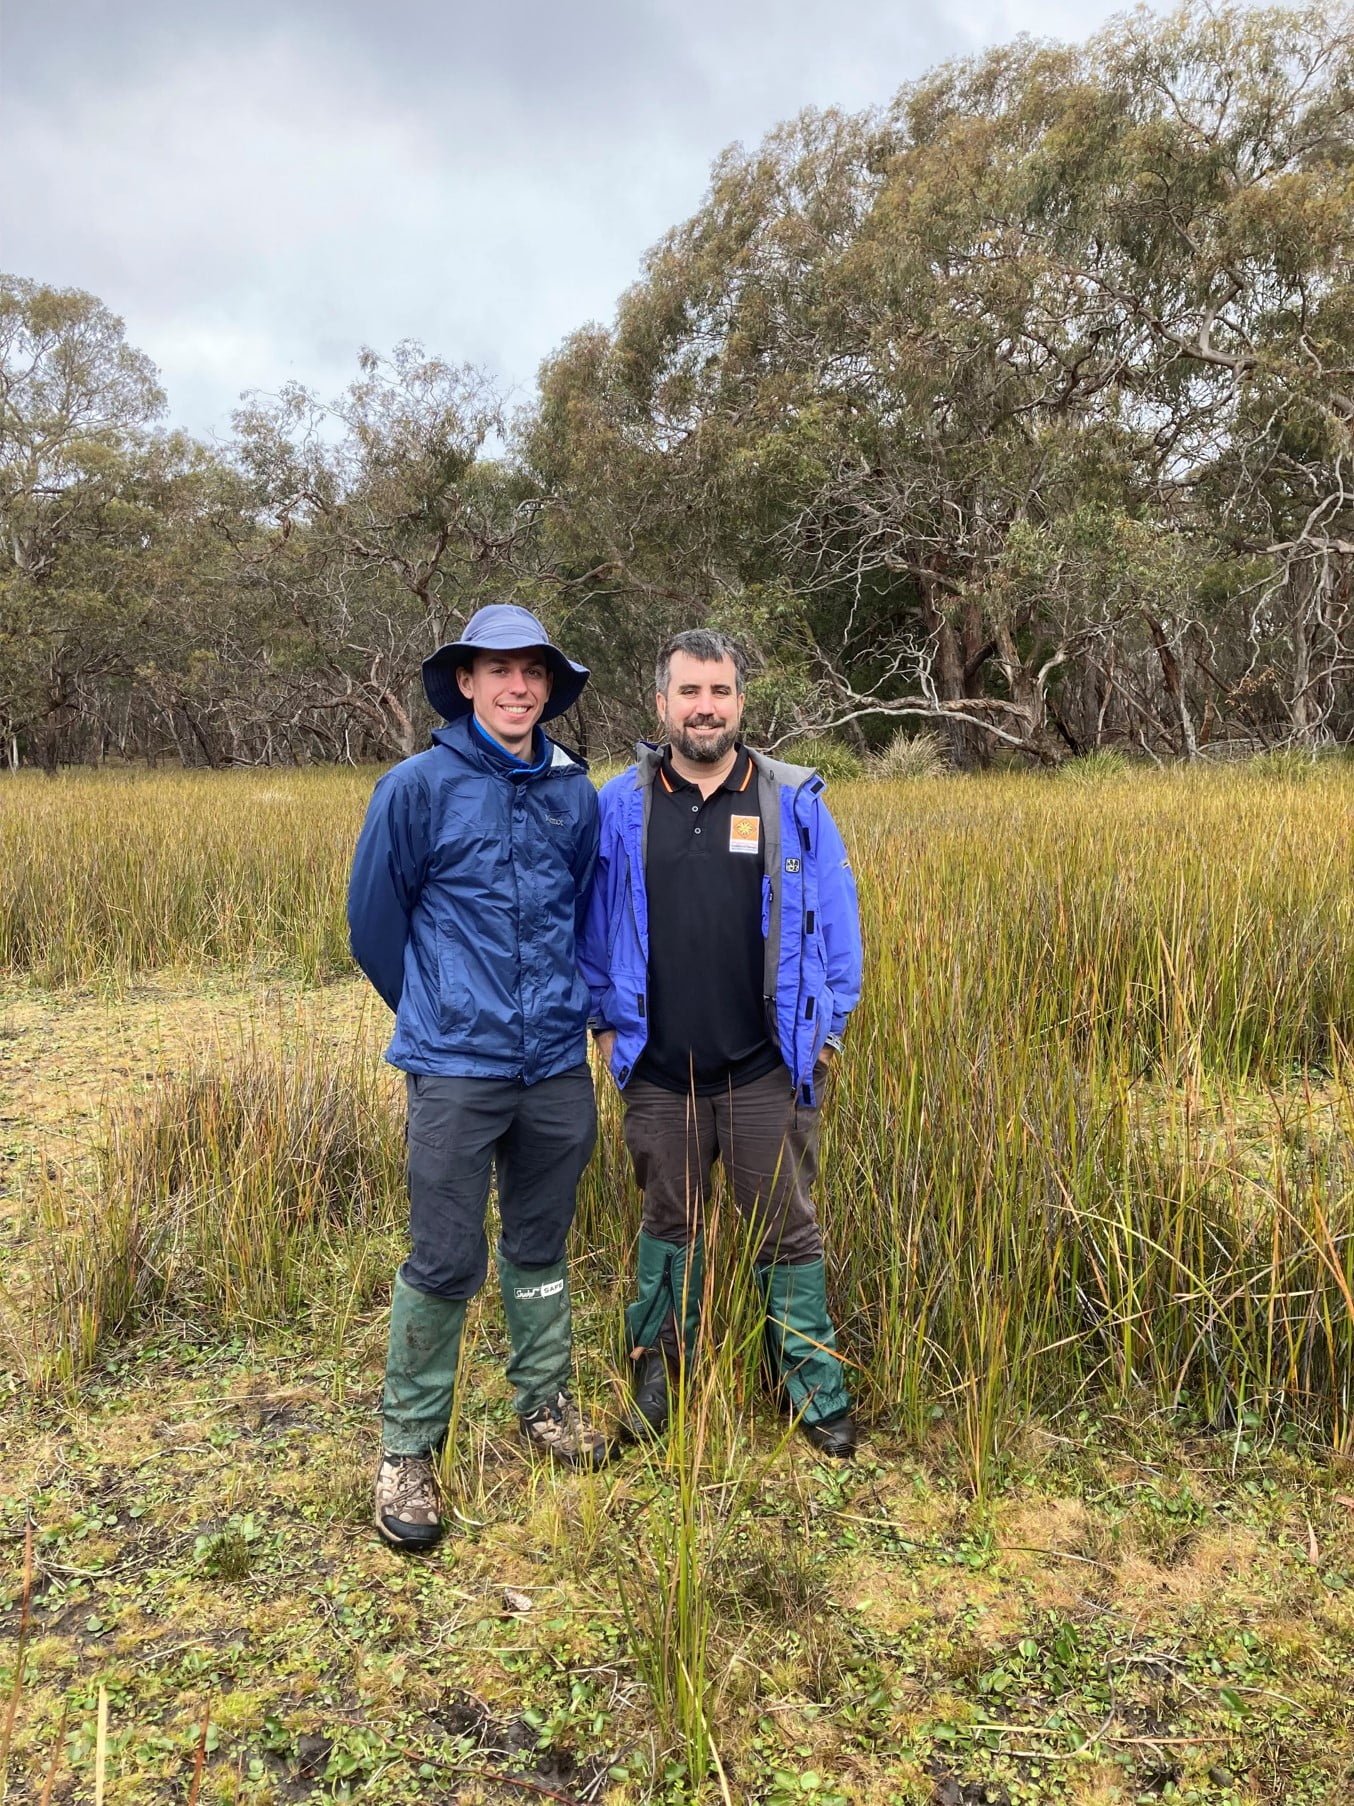 Two men stand side-by-side at a wetland wearing blue rainproof jackets, boots and gators.